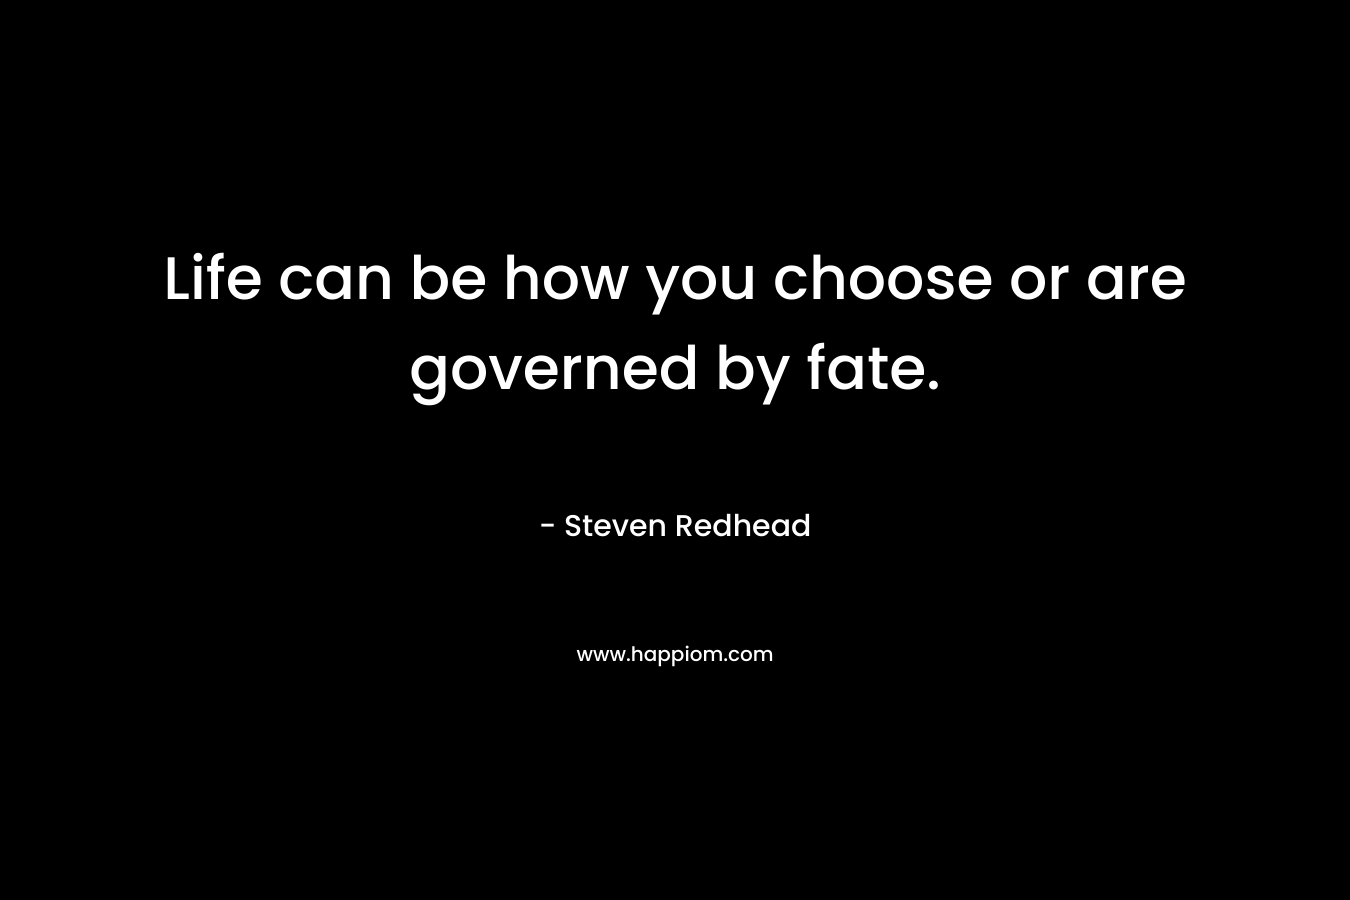 Life can be how you choose or are governed by fate. – Steven Redhead